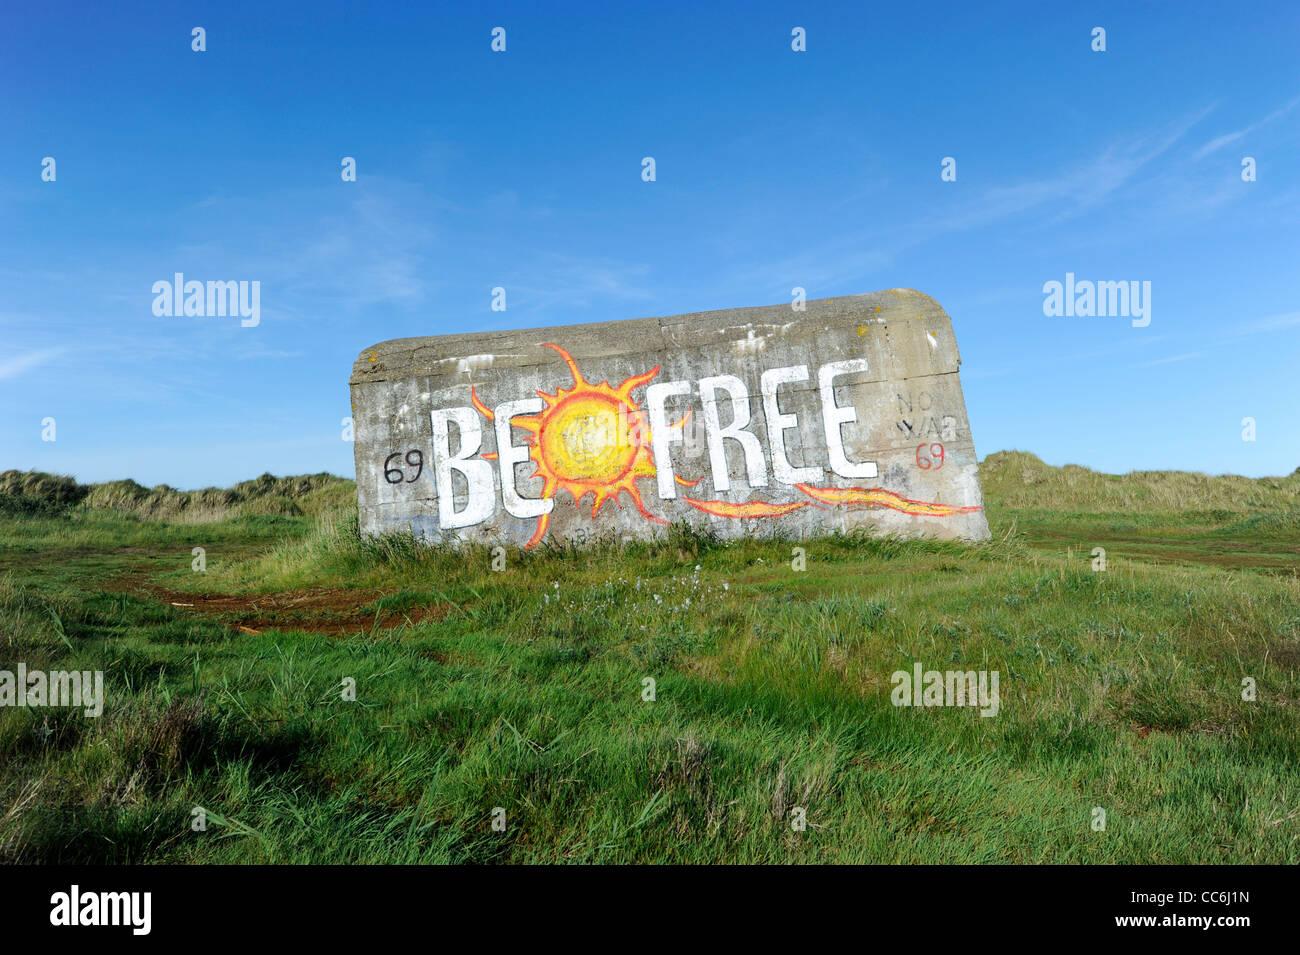 Old bunker in the dunes, with graffiti "Be Free", Fano island, Denmark,  Scandinavia, Europe Stock Photo - Alamy